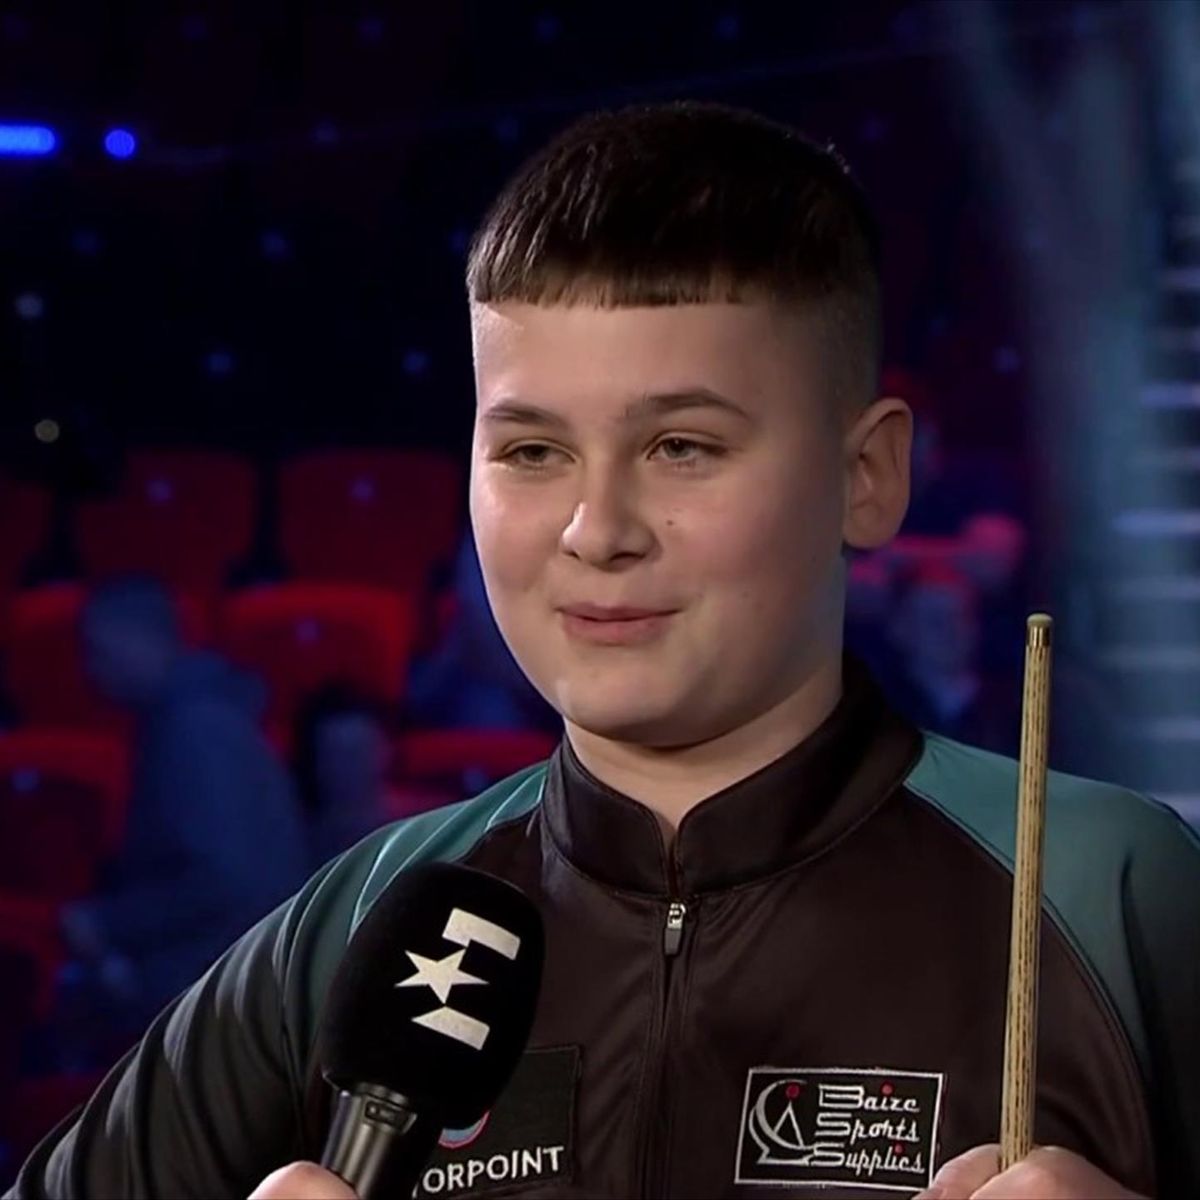 World champion - Riley Powell dreams big after Shoot Out heroics - Snooker video